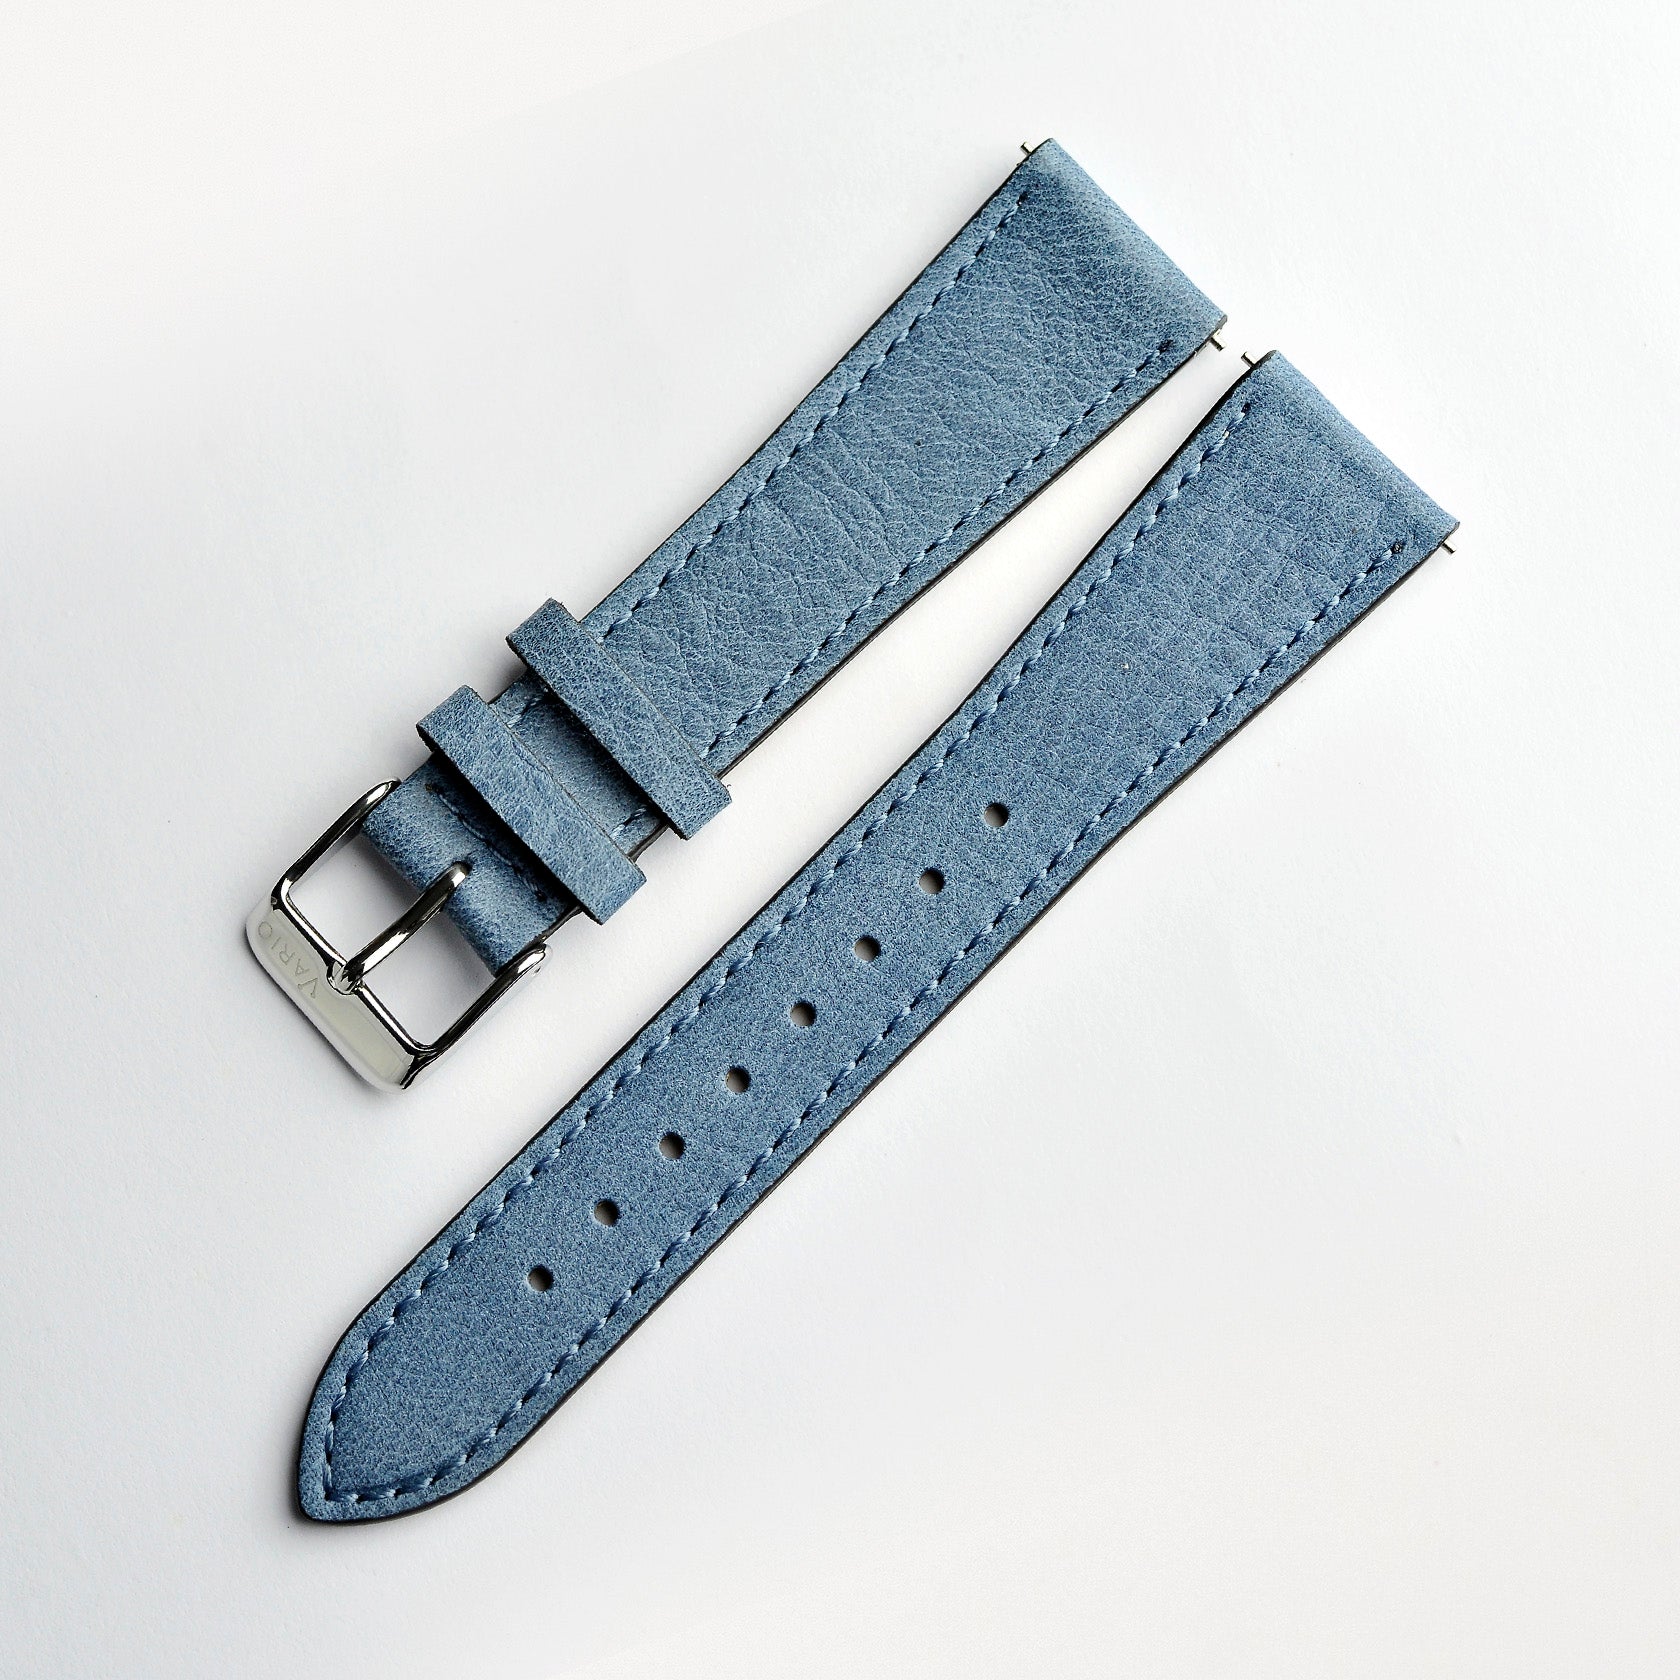 Vintage Natural Grain German Leather Yale Blue Watch Strap with Quick Release